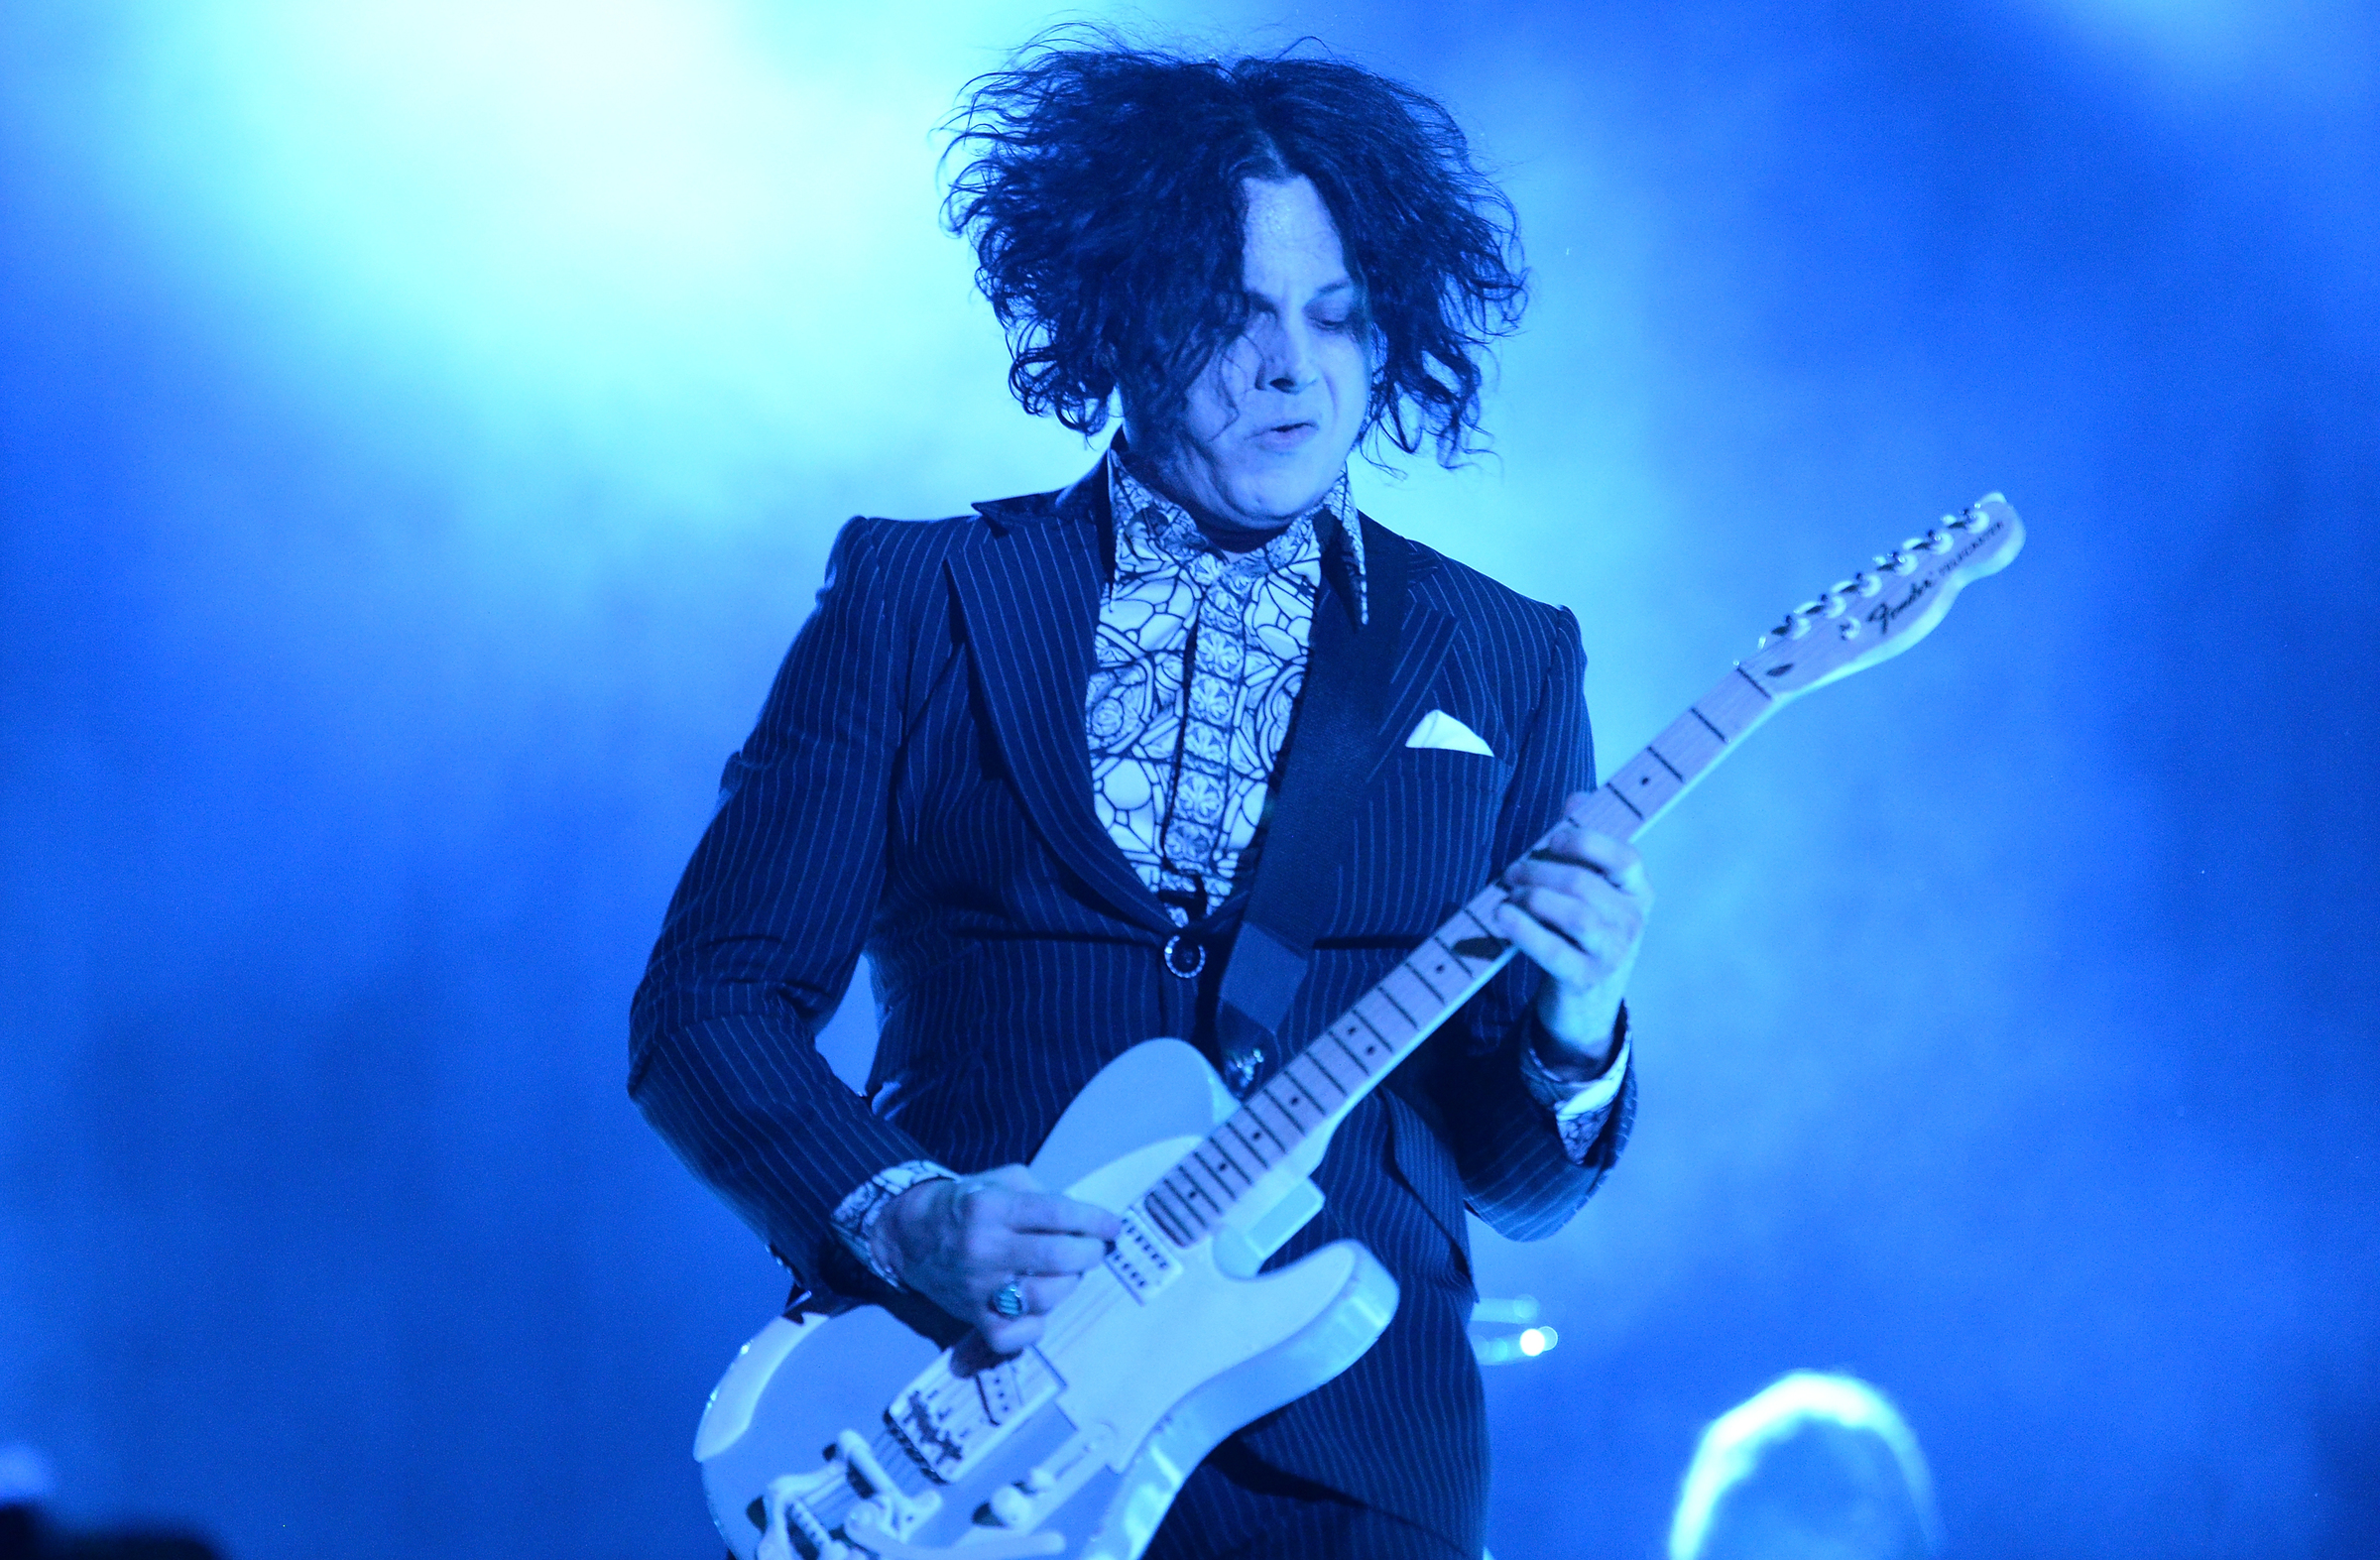 MANCHESTER, TN - JUNE 14:  Singer Jack White  performs during the 2014 Bonnaroo Music & Arts Festival on June 14, 2014 in